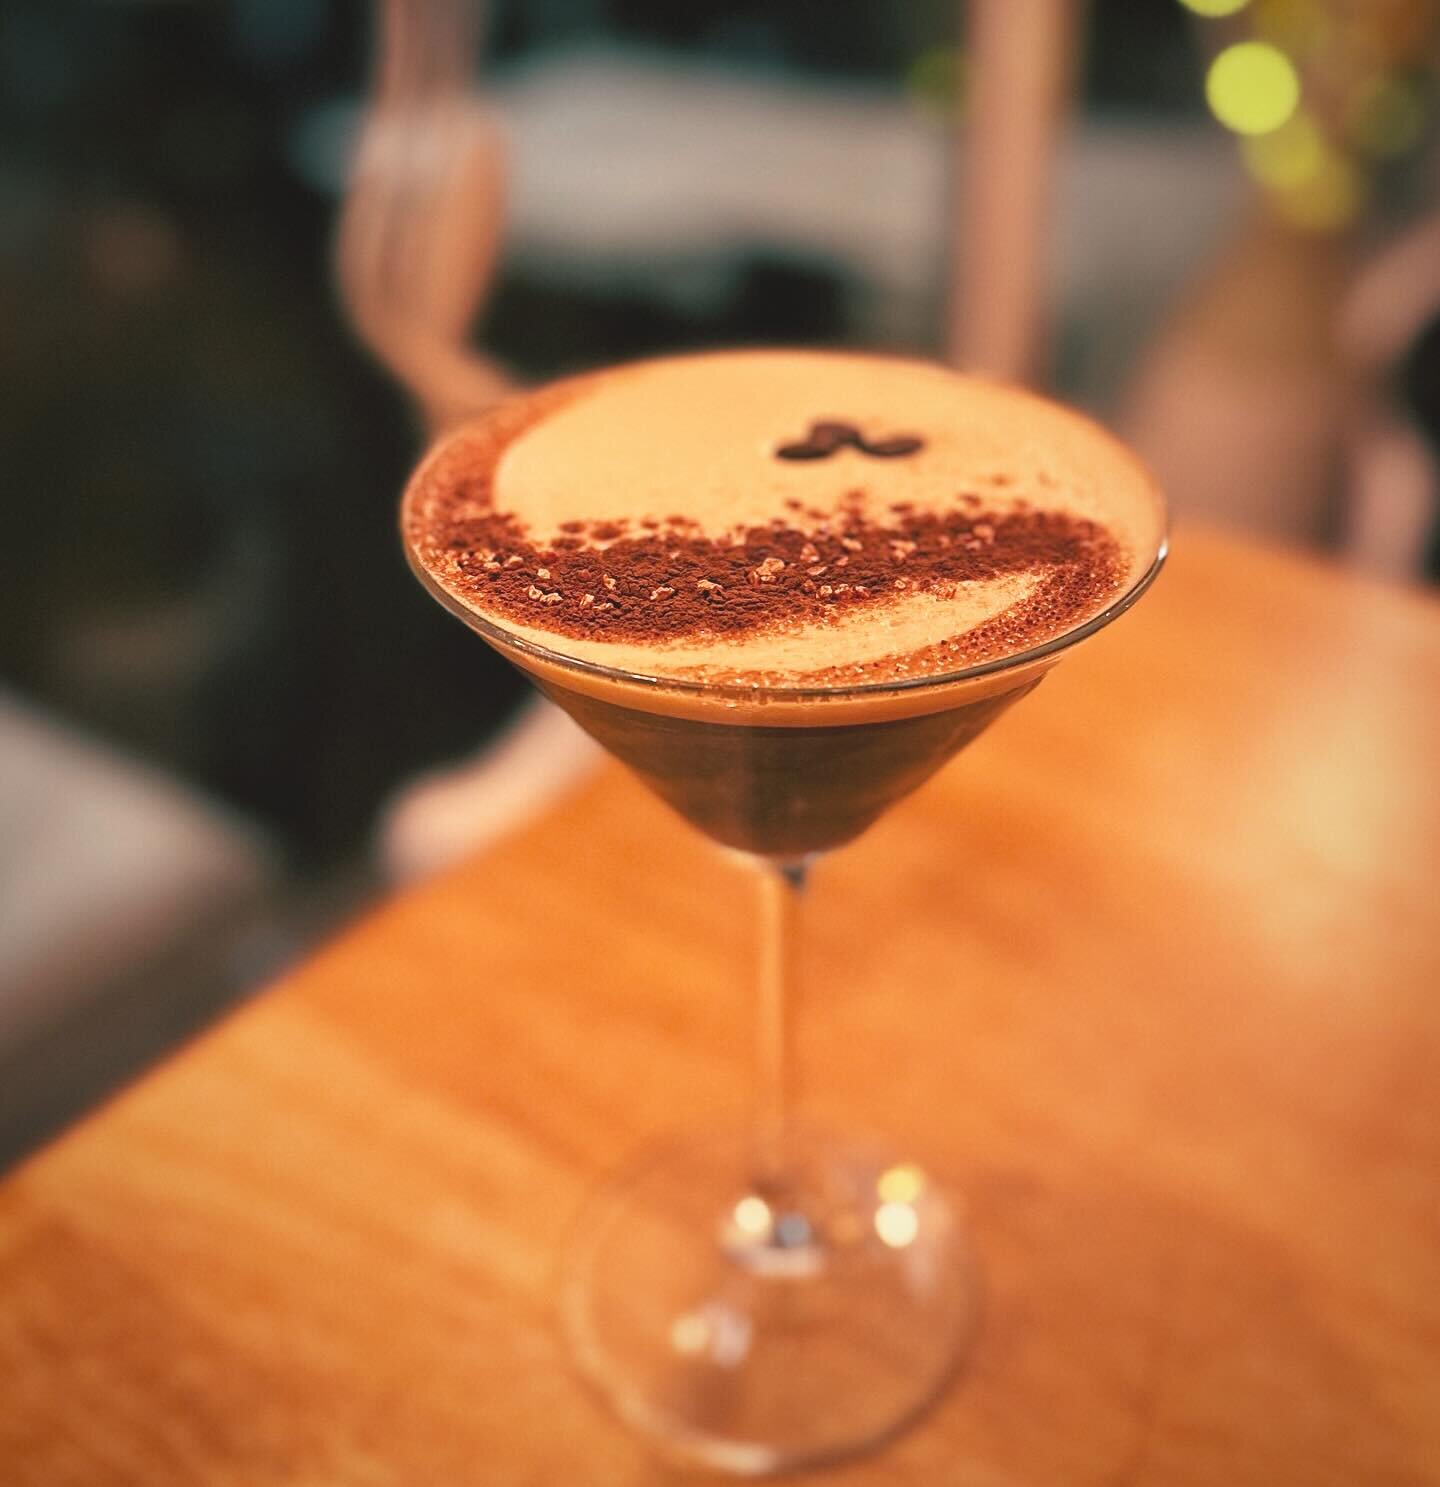 A fantastic seasonal Salt Caramel Martini 🍸🤩 The combination of sweet and salty, the shaken mixture of vodka, salted caramel syrup and coffee liqueur will make this cocktail the hit of the Christmas holidays 💃🏻🕺🏻🍸it&rsquo;s not to be missed! ?